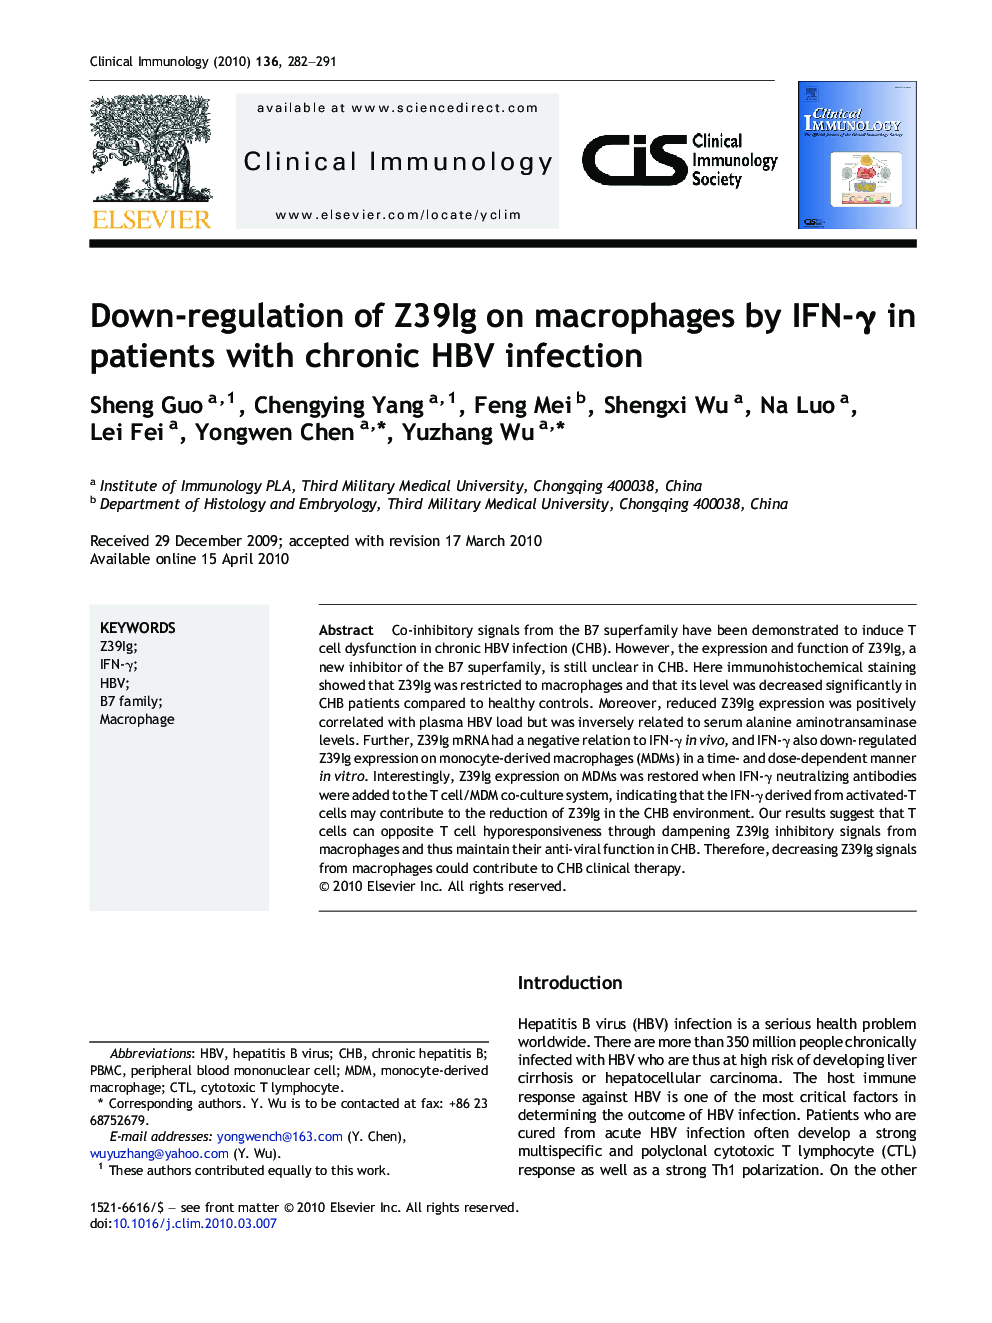 Down-regulation of Z39Ig on macrophages by IFN-γ in patients with chronic HBV infection